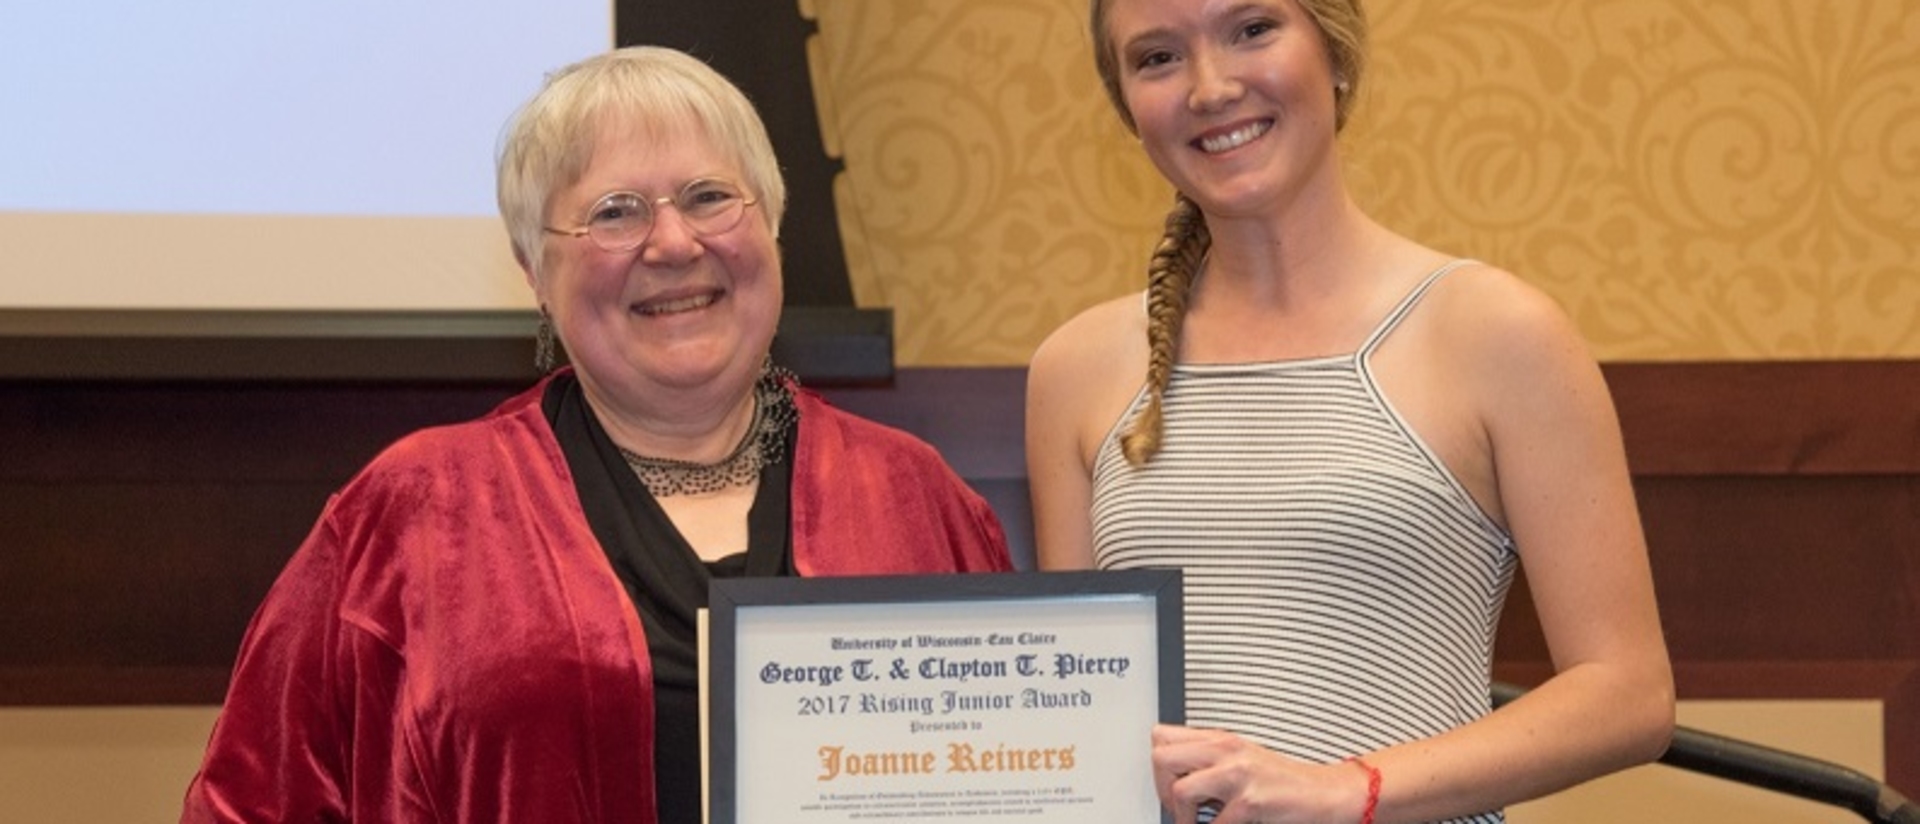 Joanne Reiners and Cathy Berry_Award